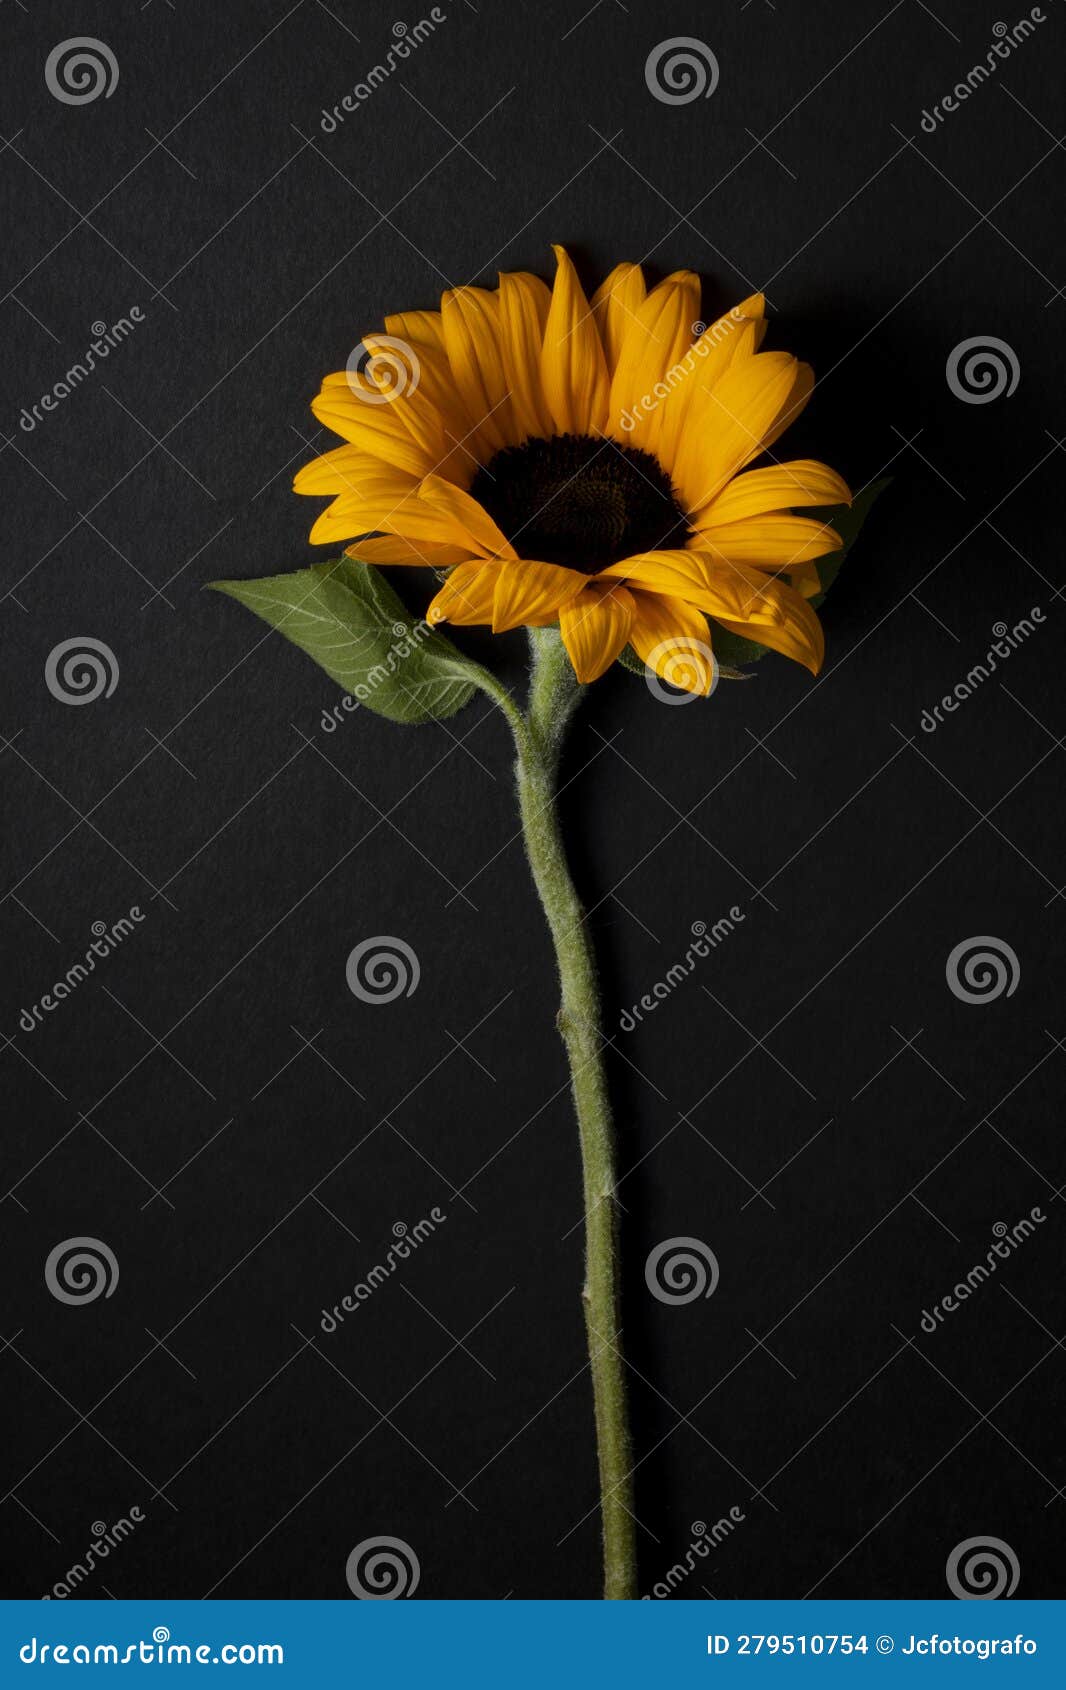 floral ornament of sunflowers on black background